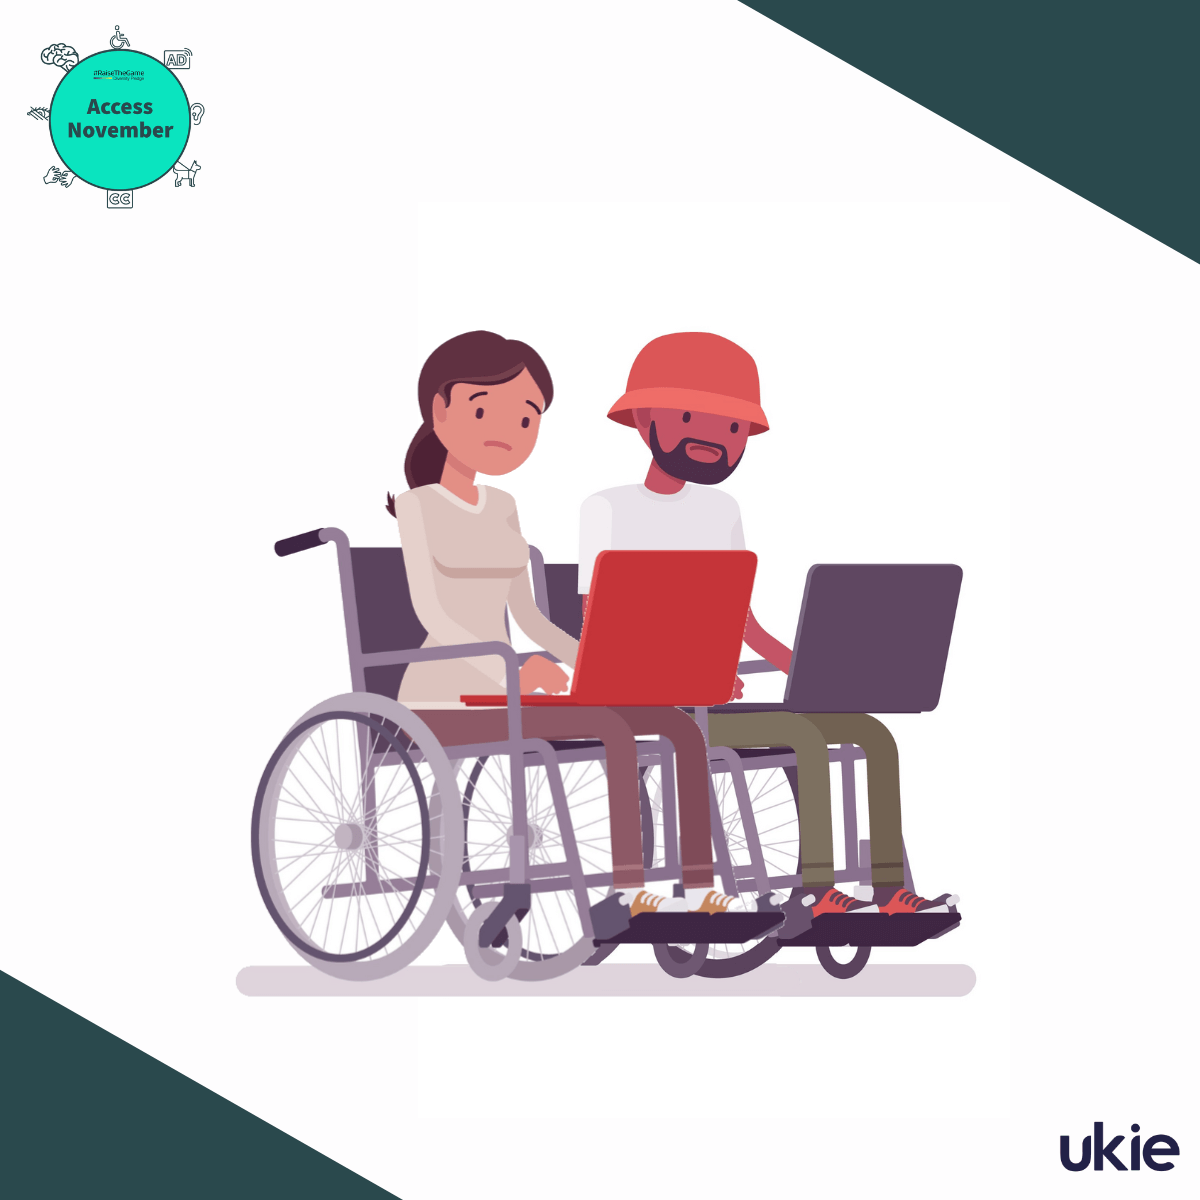 <img src="RTG_Access November Campaign 2022_Research Promo Image_1200x1200.png" alt="Image depicting two wheelchair users using their laptops to look up jobs in the games industry.">